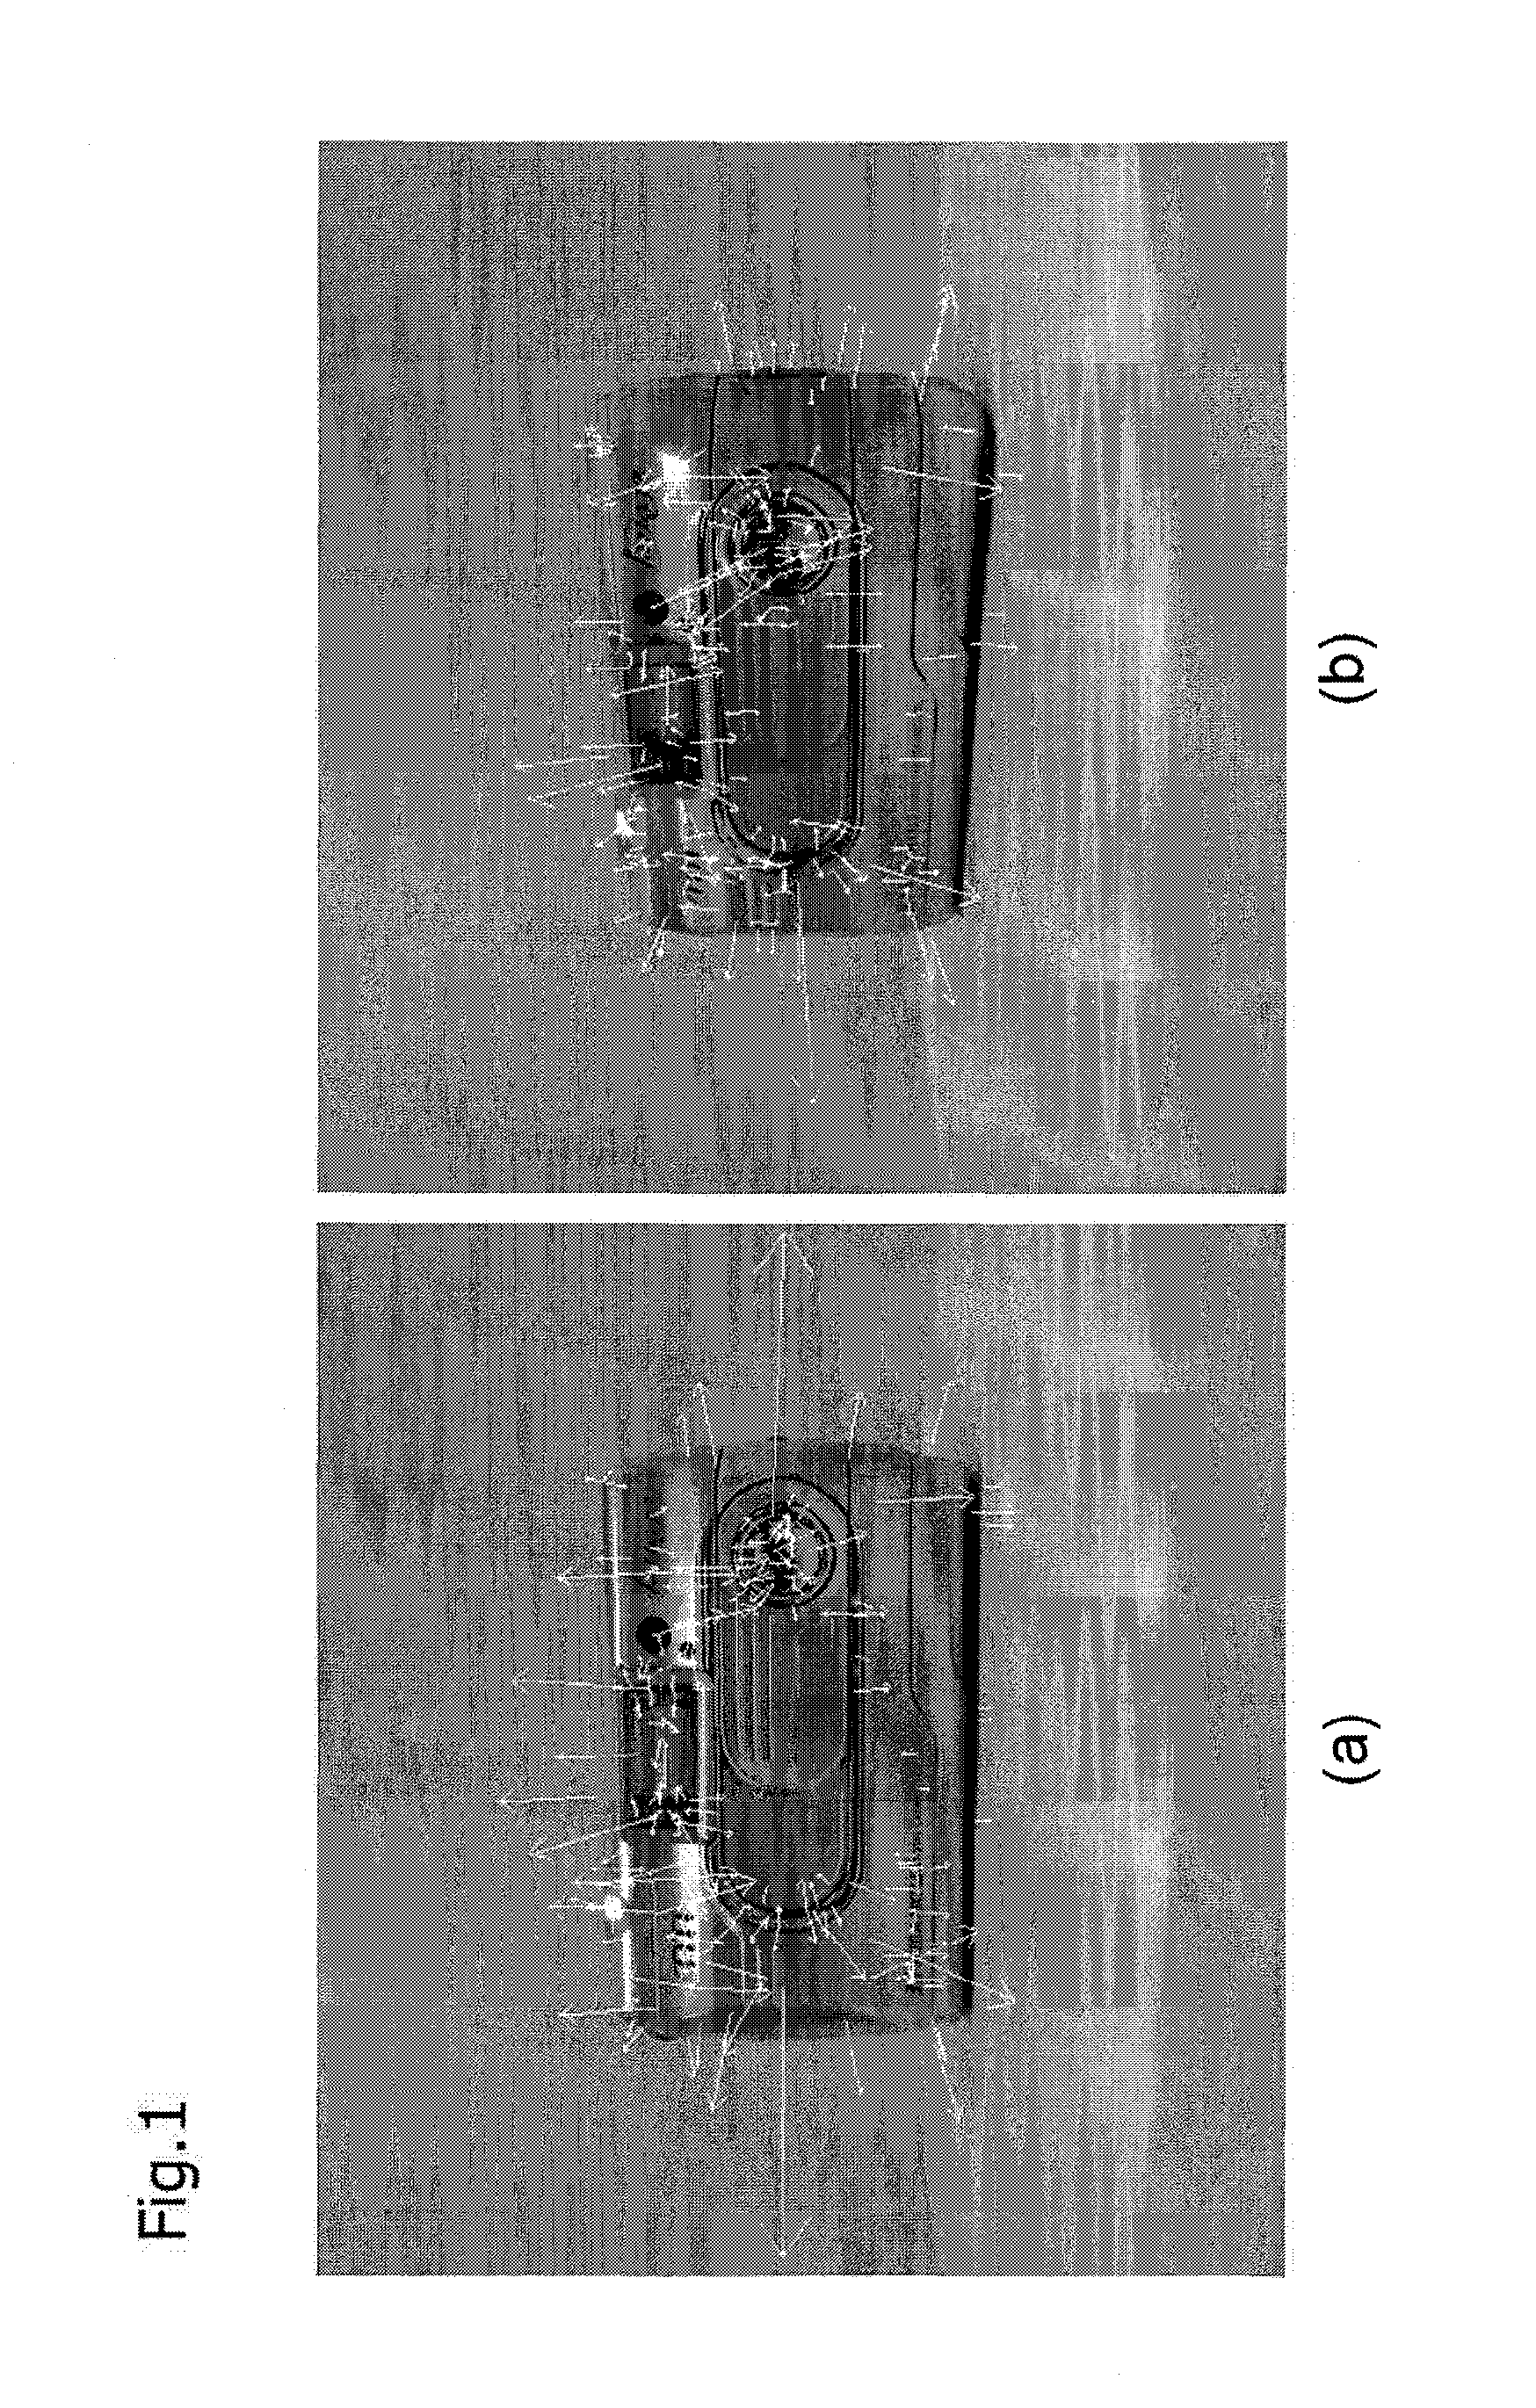 Method and apparatus of compiling image database for three-dimensional object recognition